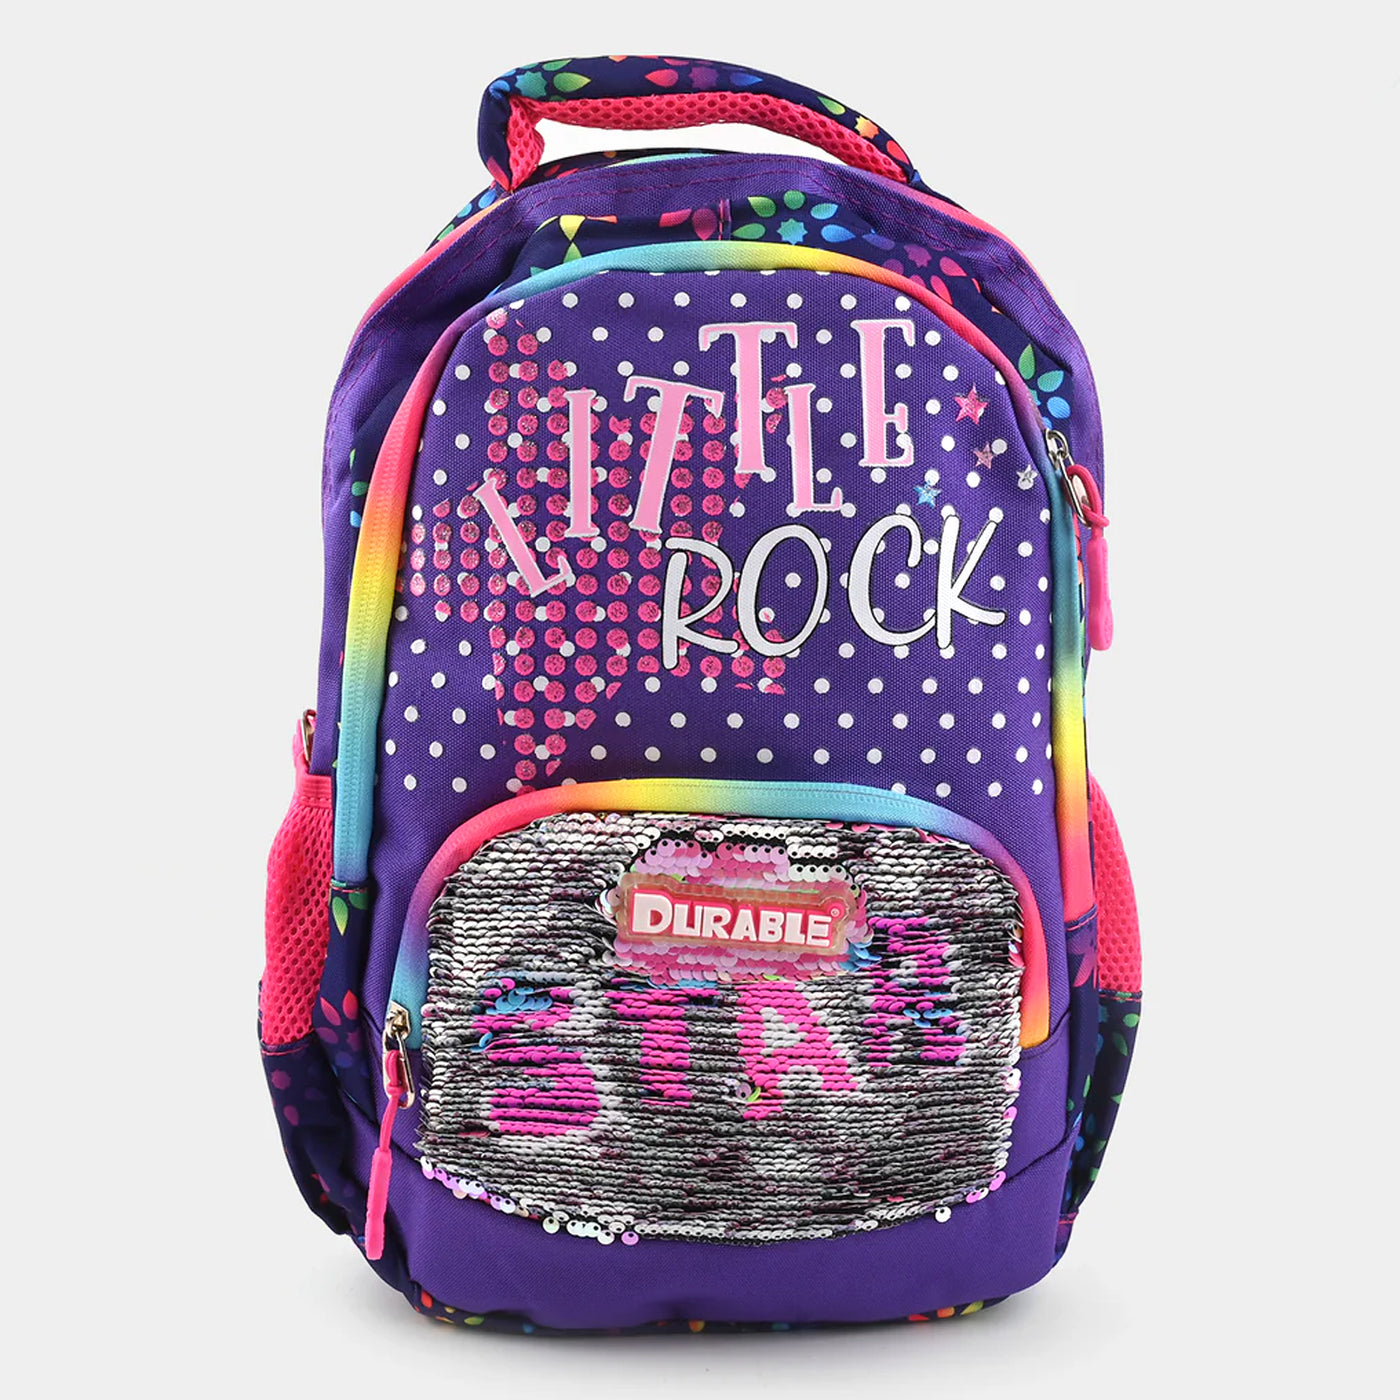 Stylish School Backpack For Kids